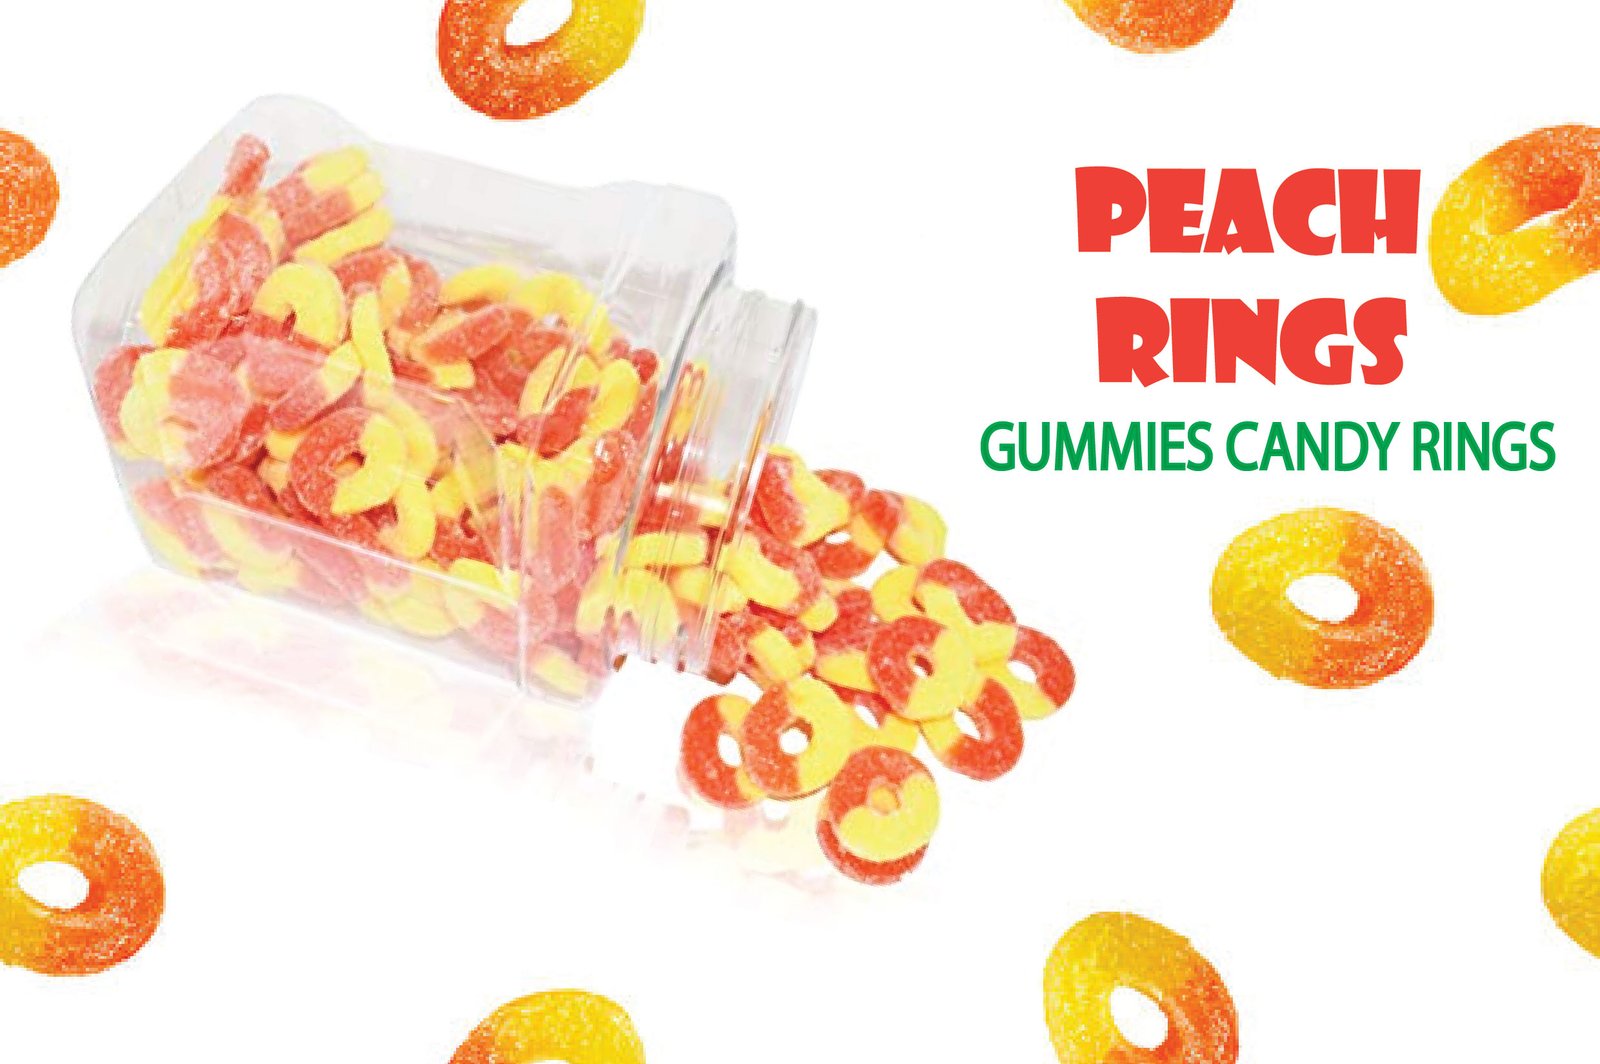 Peach Rings Excitement: Ready For New And Rich Thrills!